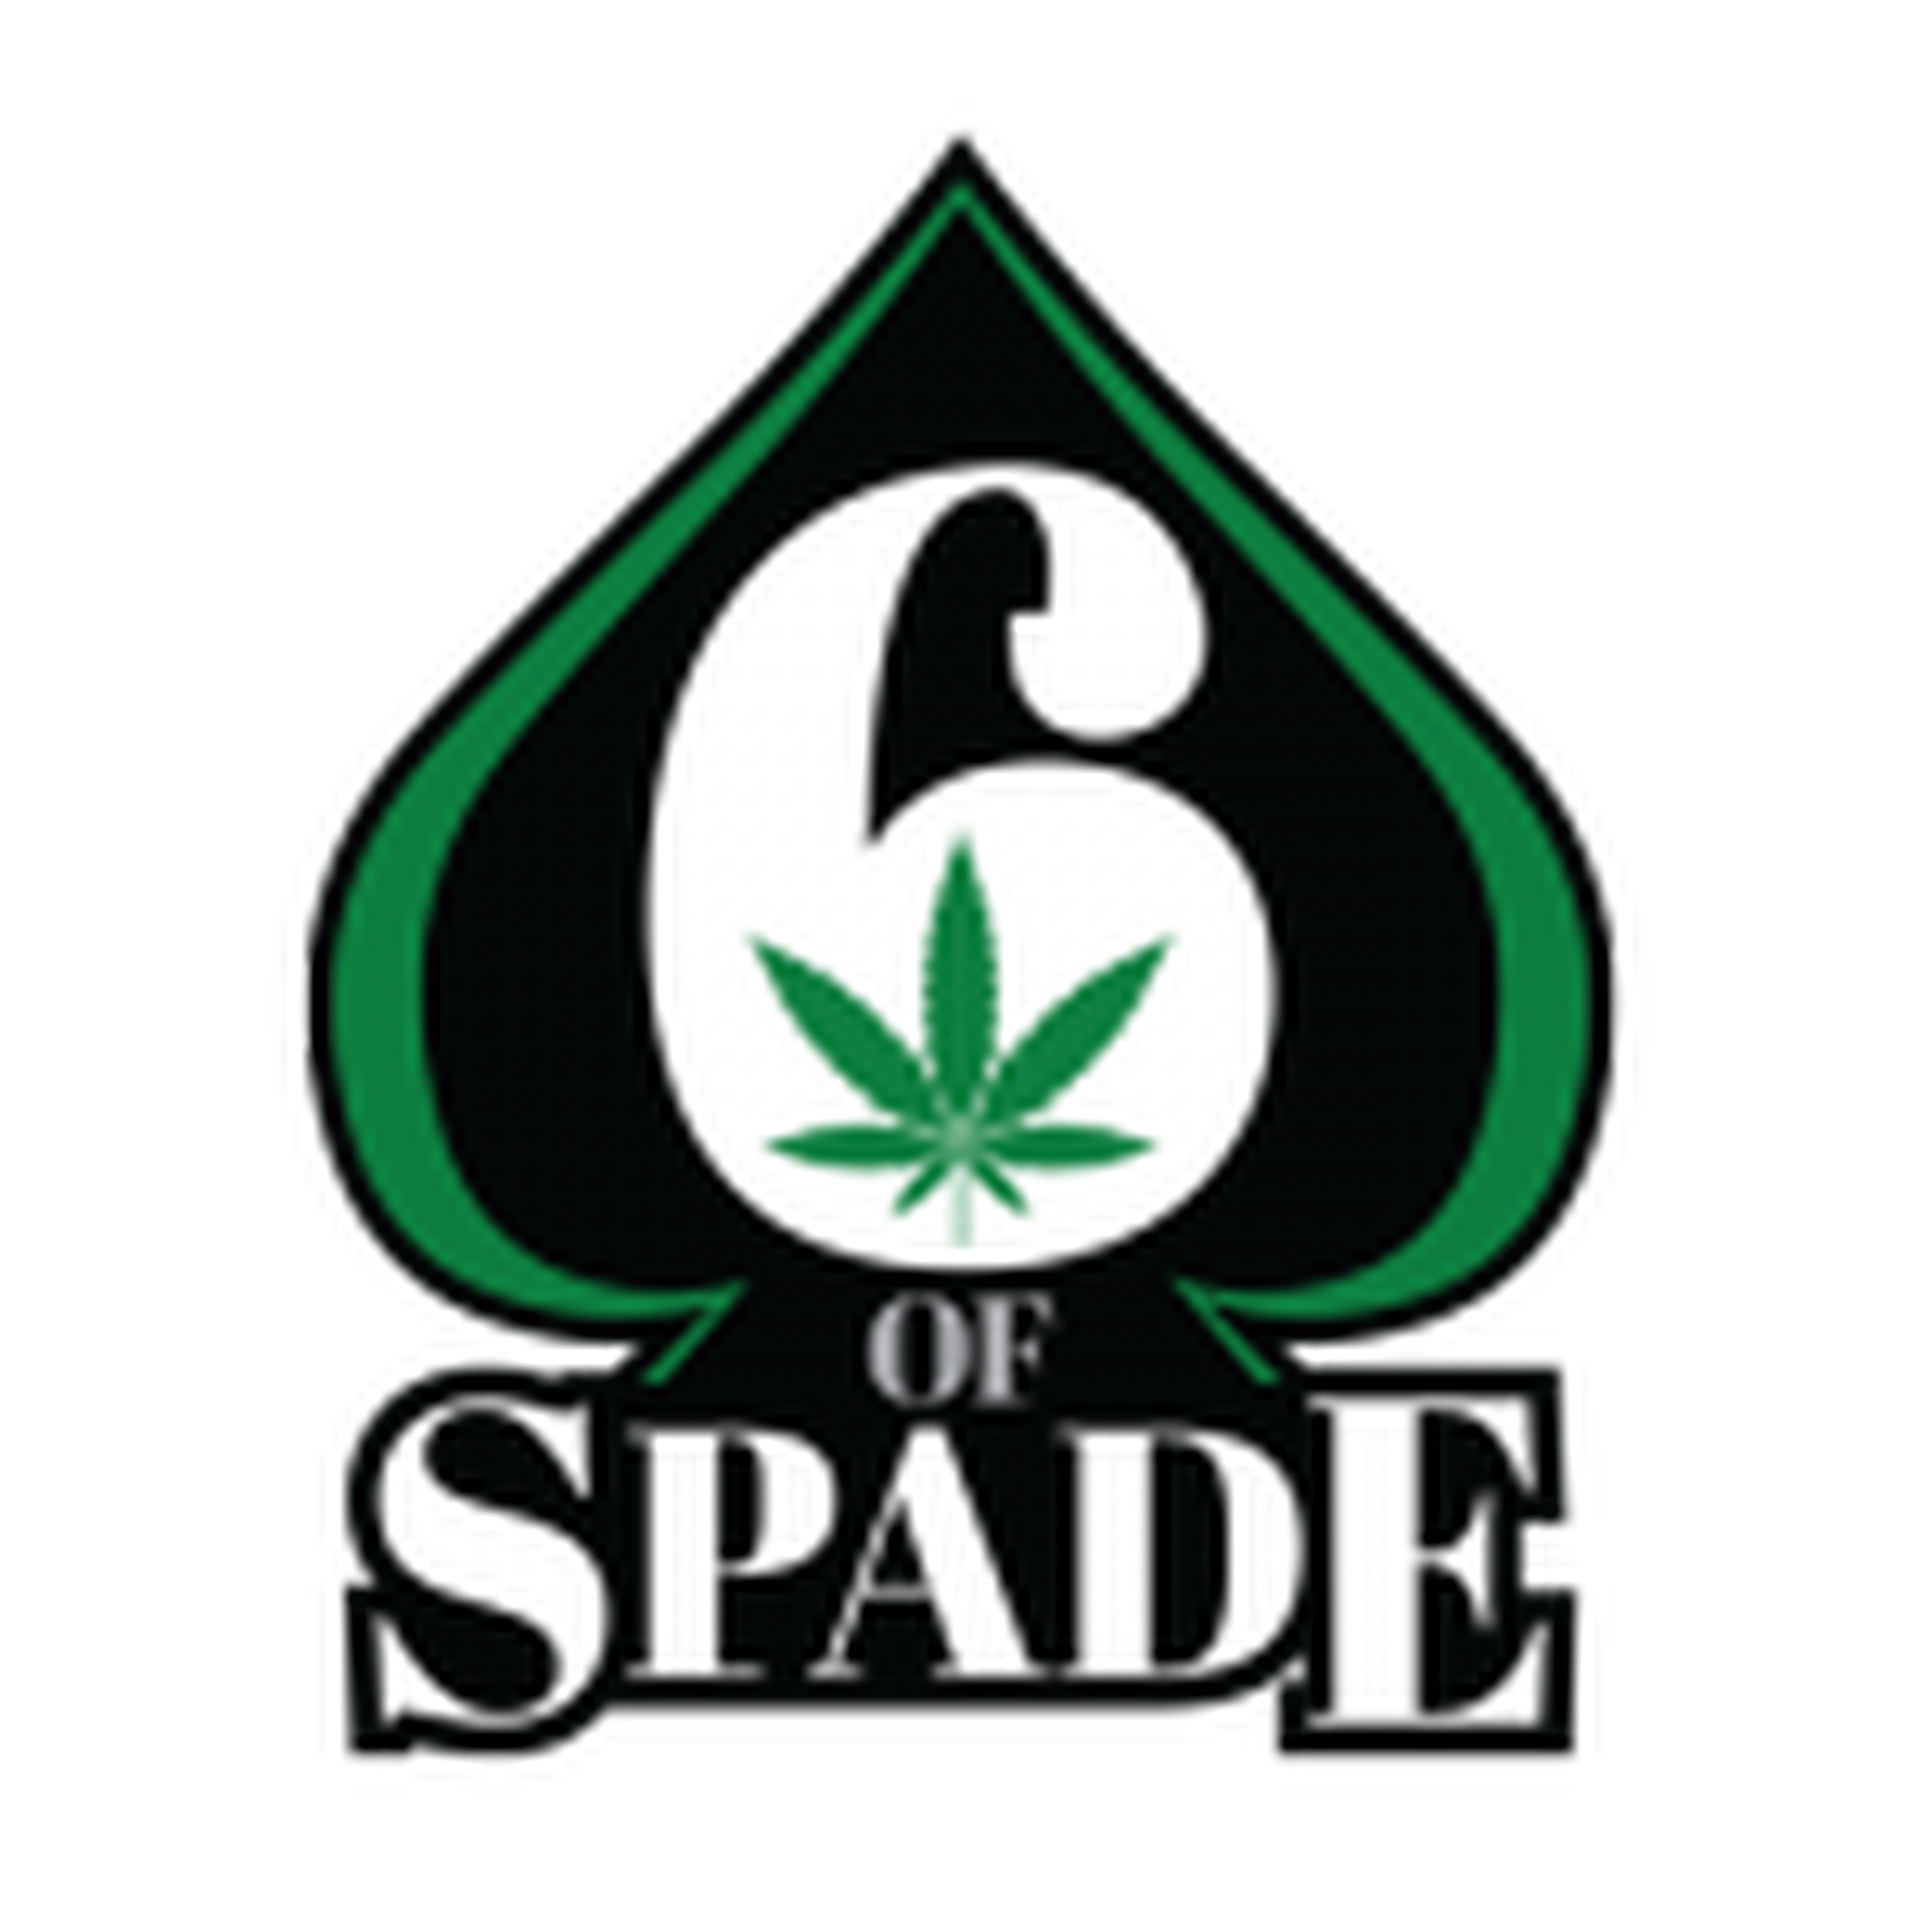 Cannabis Store 6 of Spade - Toronto - Best Prices In Town!  - 1